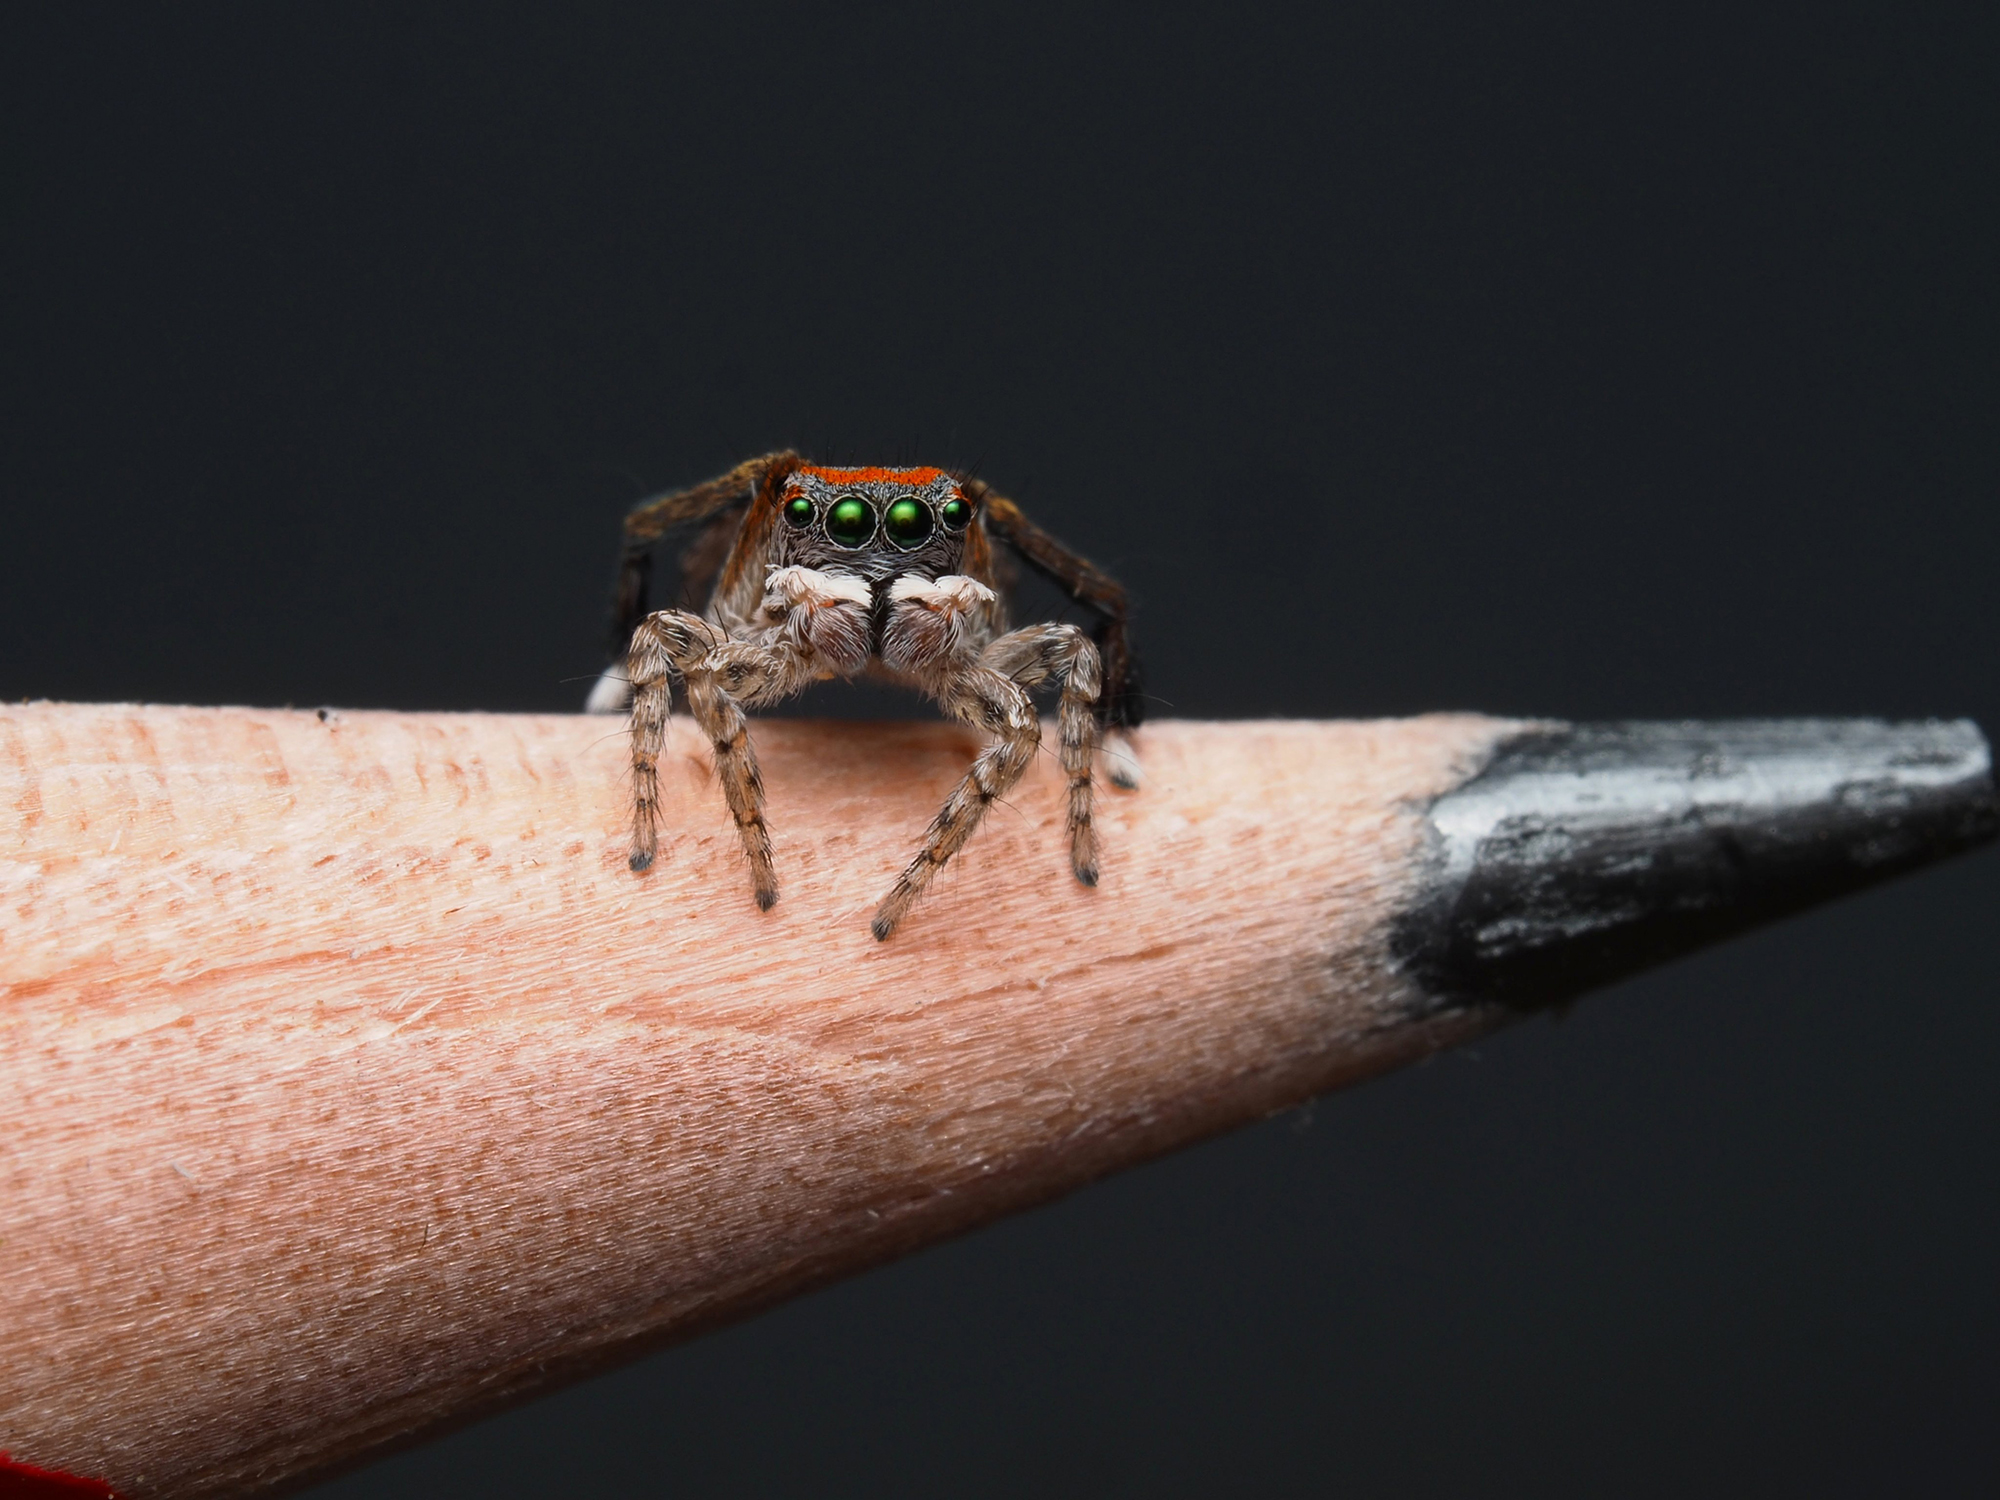 Jumping Spider: Everything You Need to Know + 7 Facts!